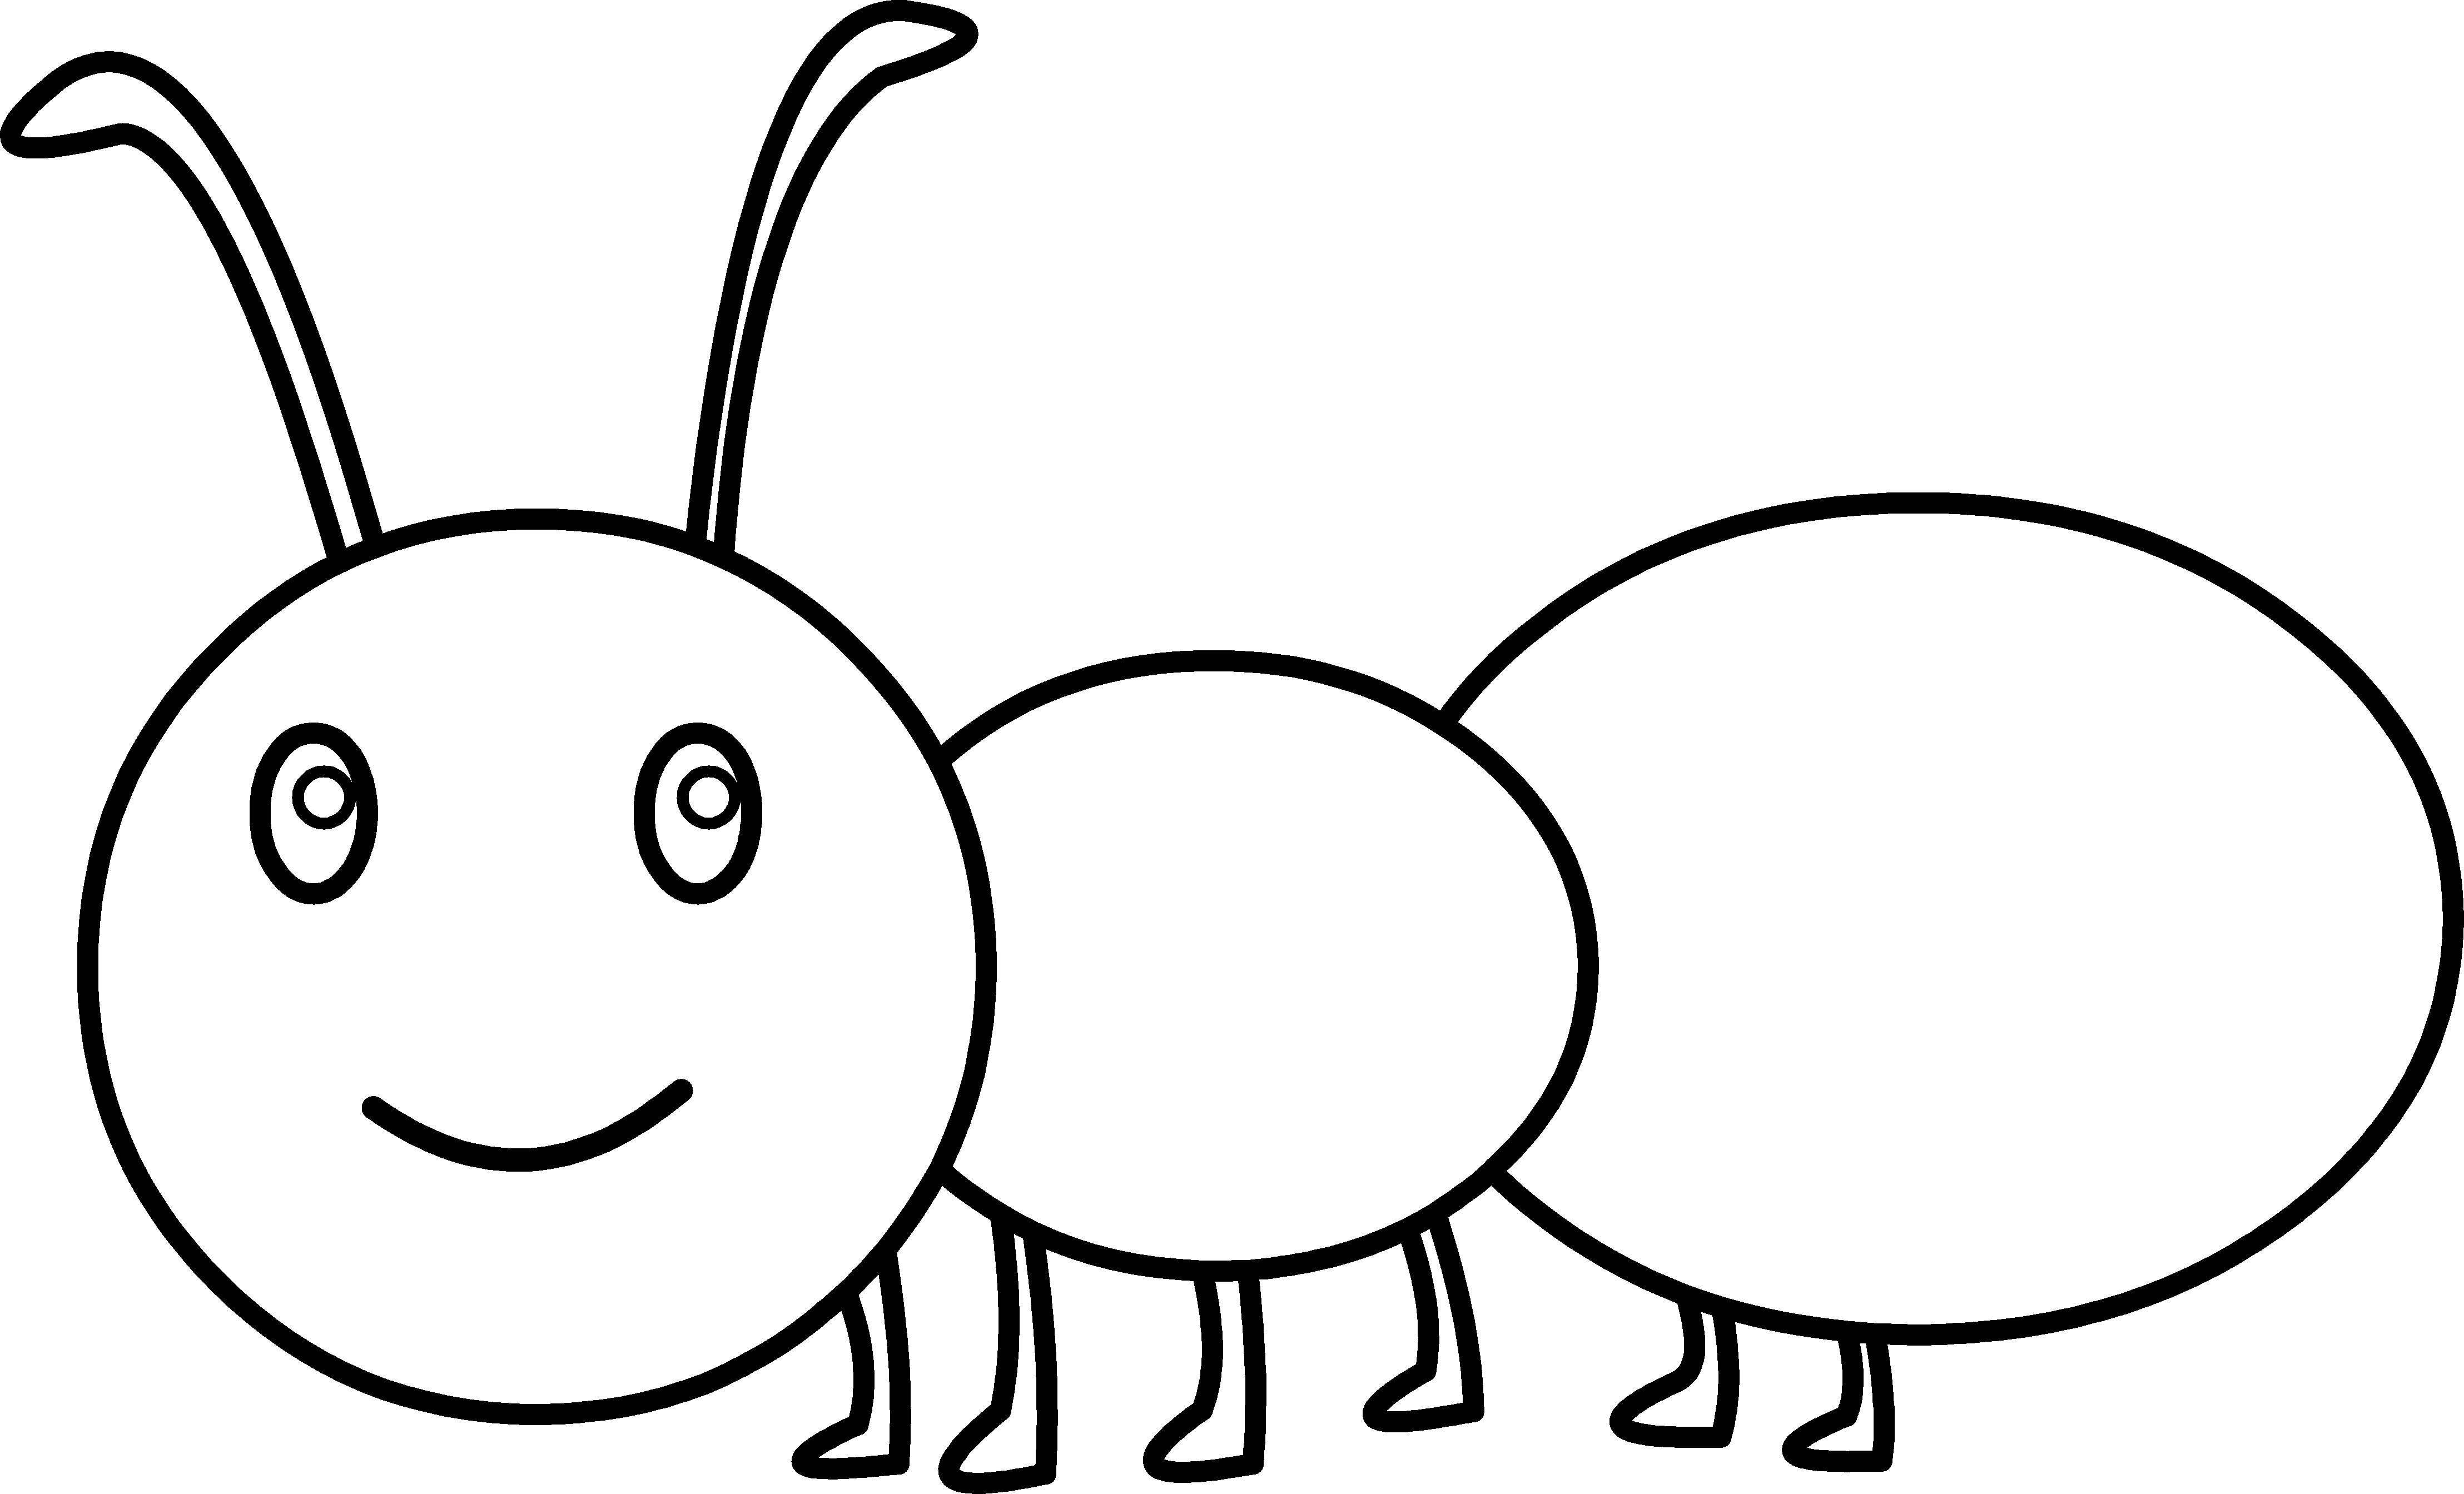 Ant clipart colouring page. Cute coloring free clip